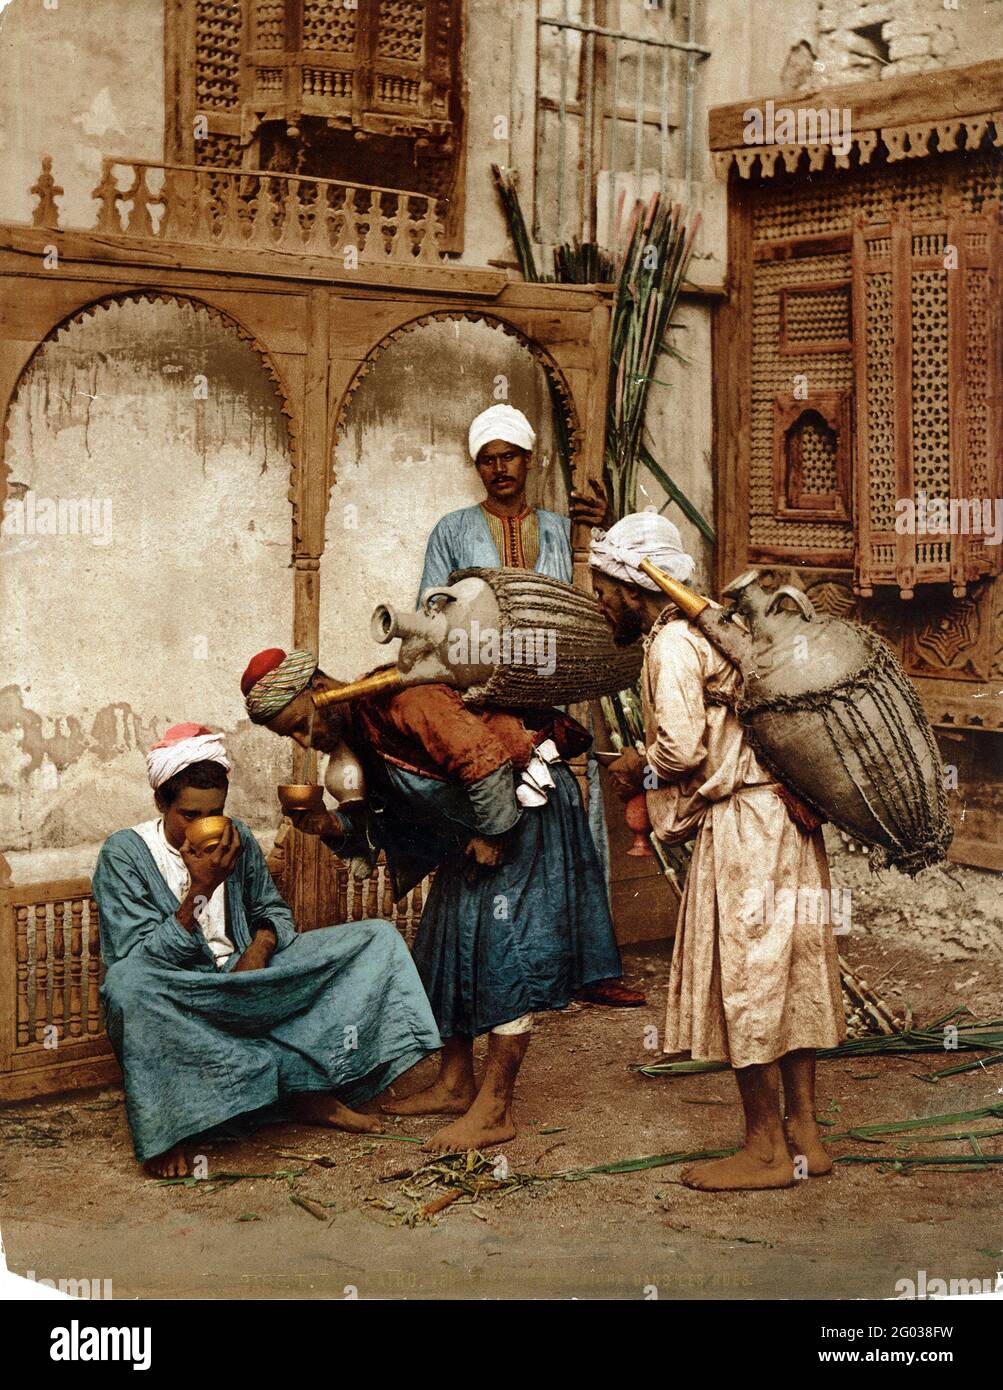 Photochrome of water sellers on the streets of Cairo, Egypt, circa 1880. Photography by Félix Bonfils (1831 - 1885). Stock Photo